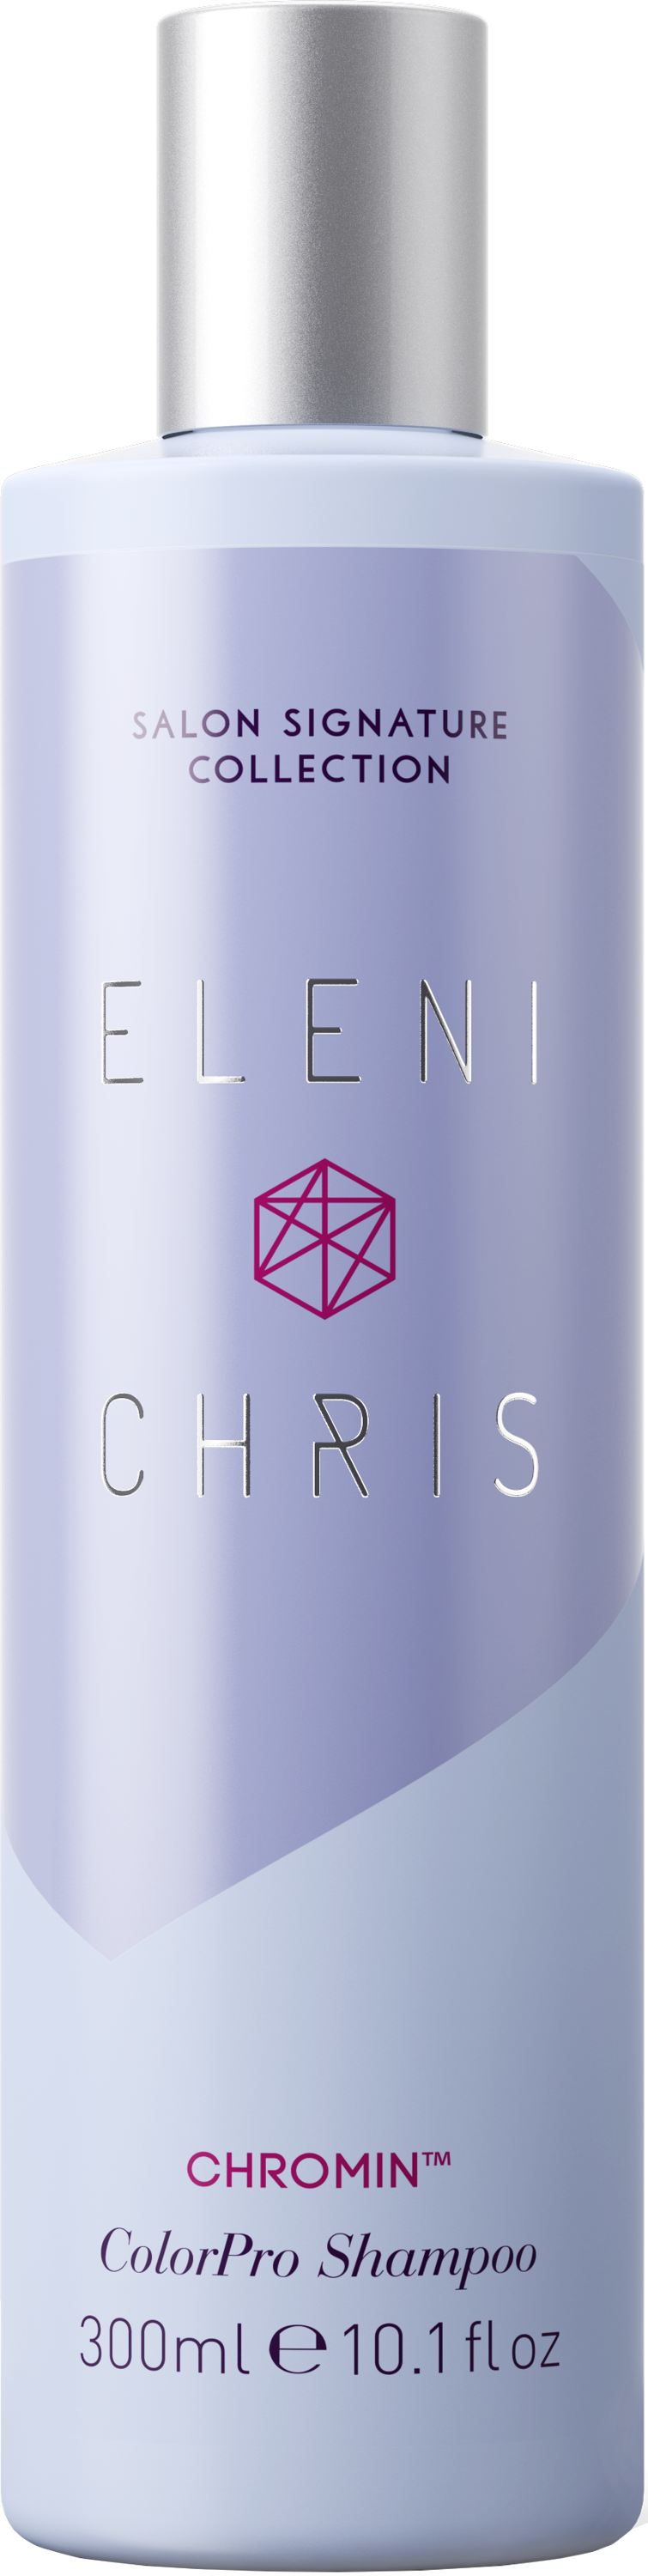 https://eleniandchris.no/collections/harpleie/products/chromin-colorpro-shampoo